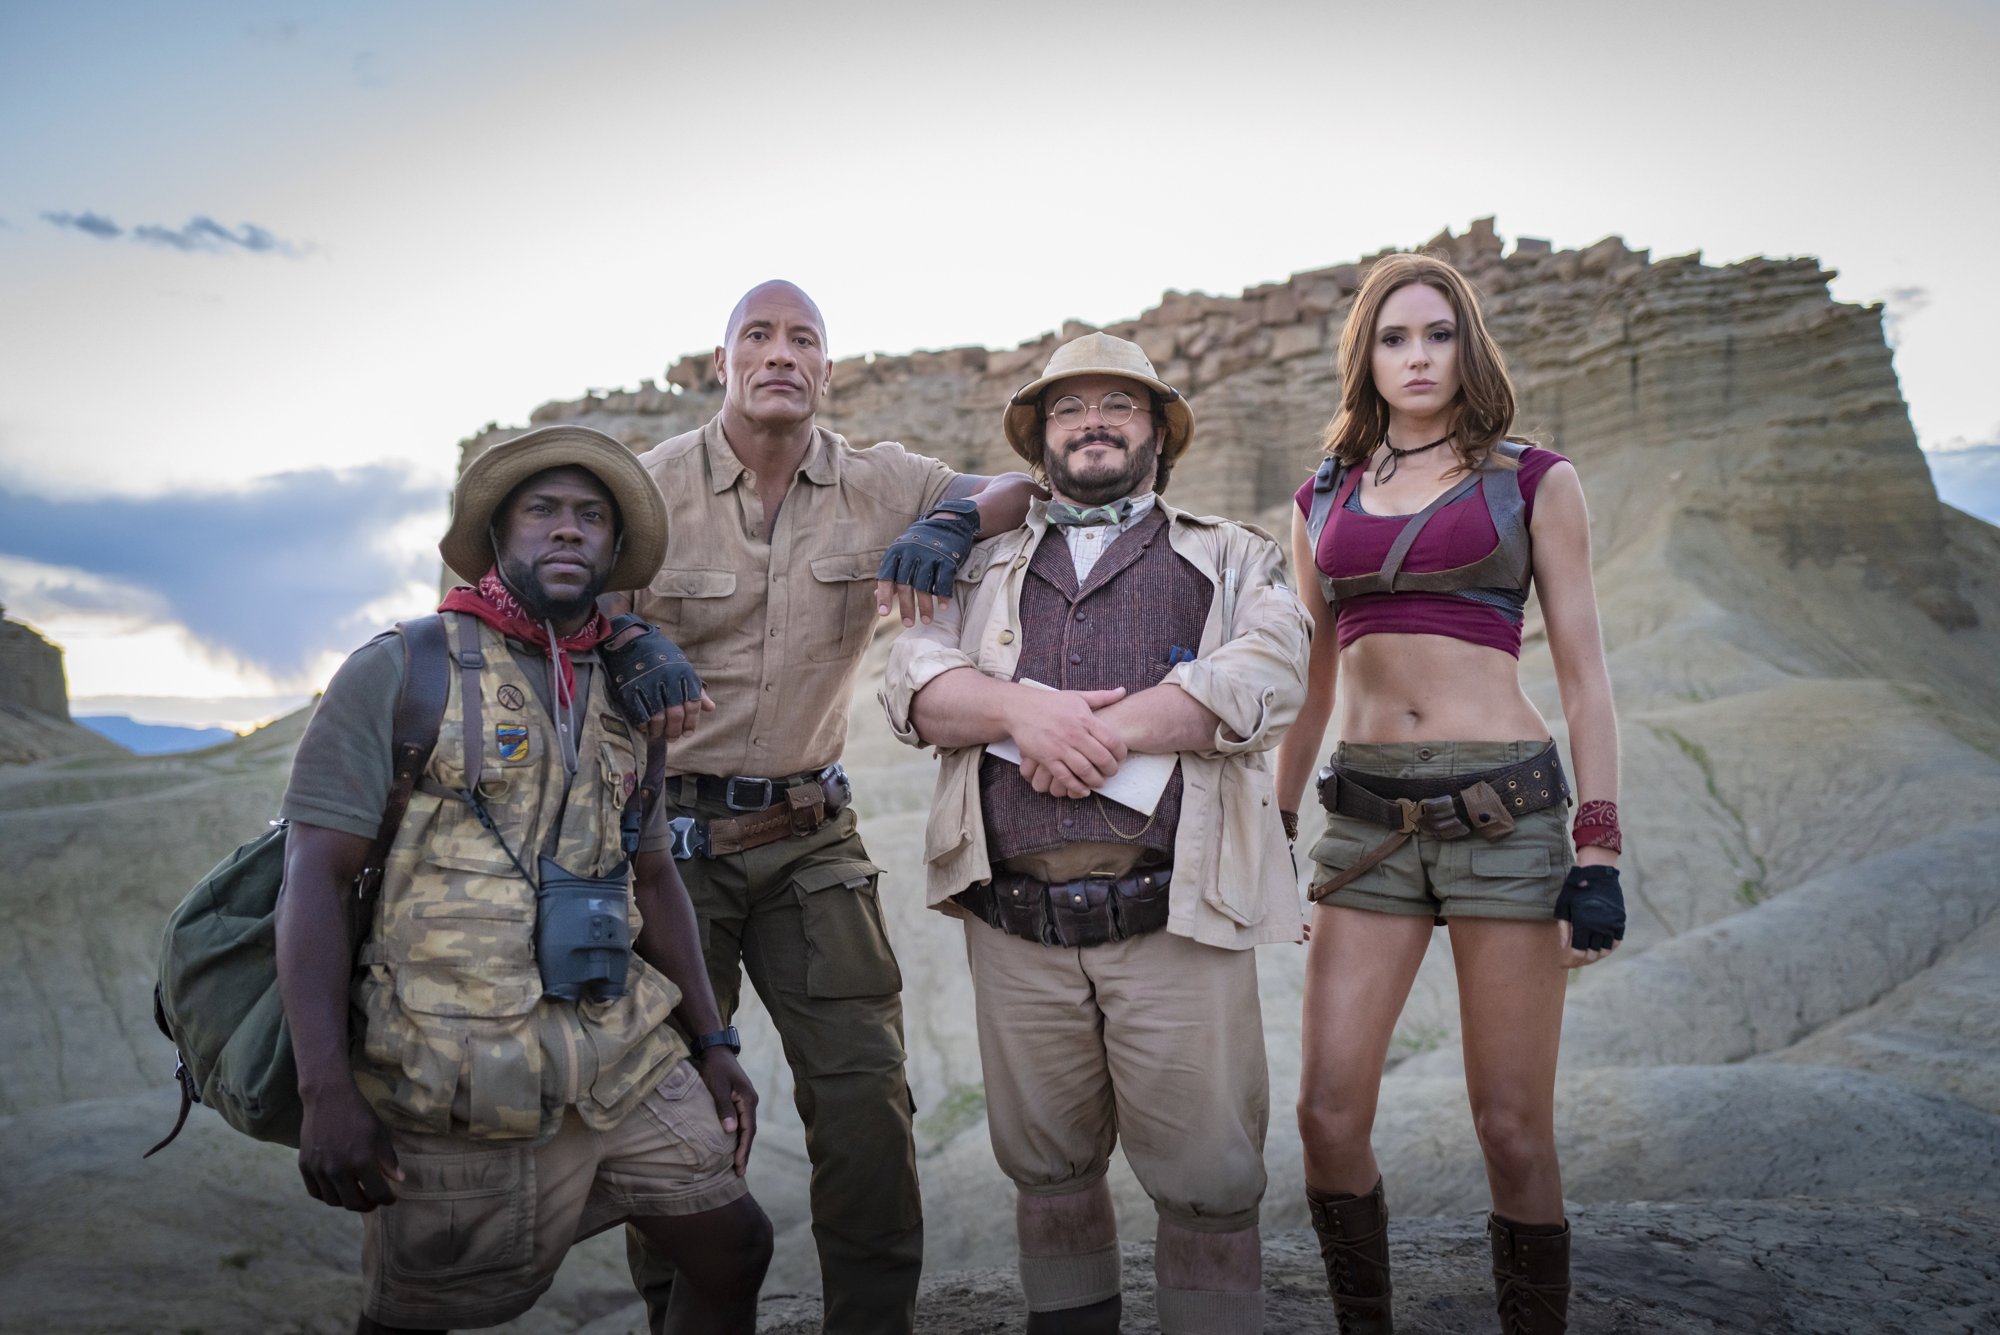 Kevin Hart, The Rock, Jack Black and Karen Gillan in Sony Pictures' Jumanji: The Next Level (2019)